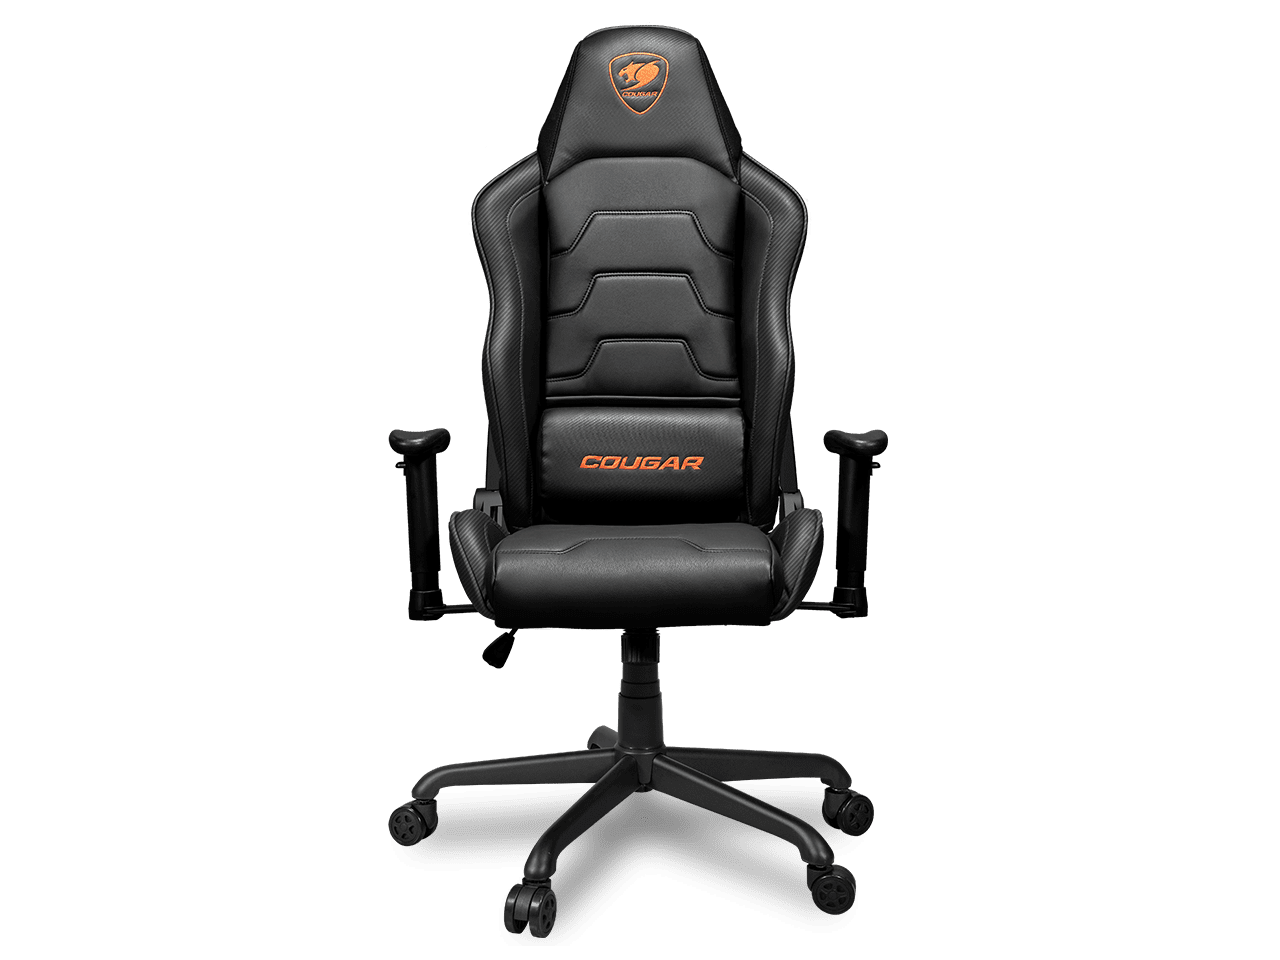 Gaming chair Cougar Armor One X Green computer, up to 120 kg, PU leather,  2D, 180° folding back, Ergonomic, comfortable work on computer, healthy  back, correct posture, massage chair, office chair - AliExpress